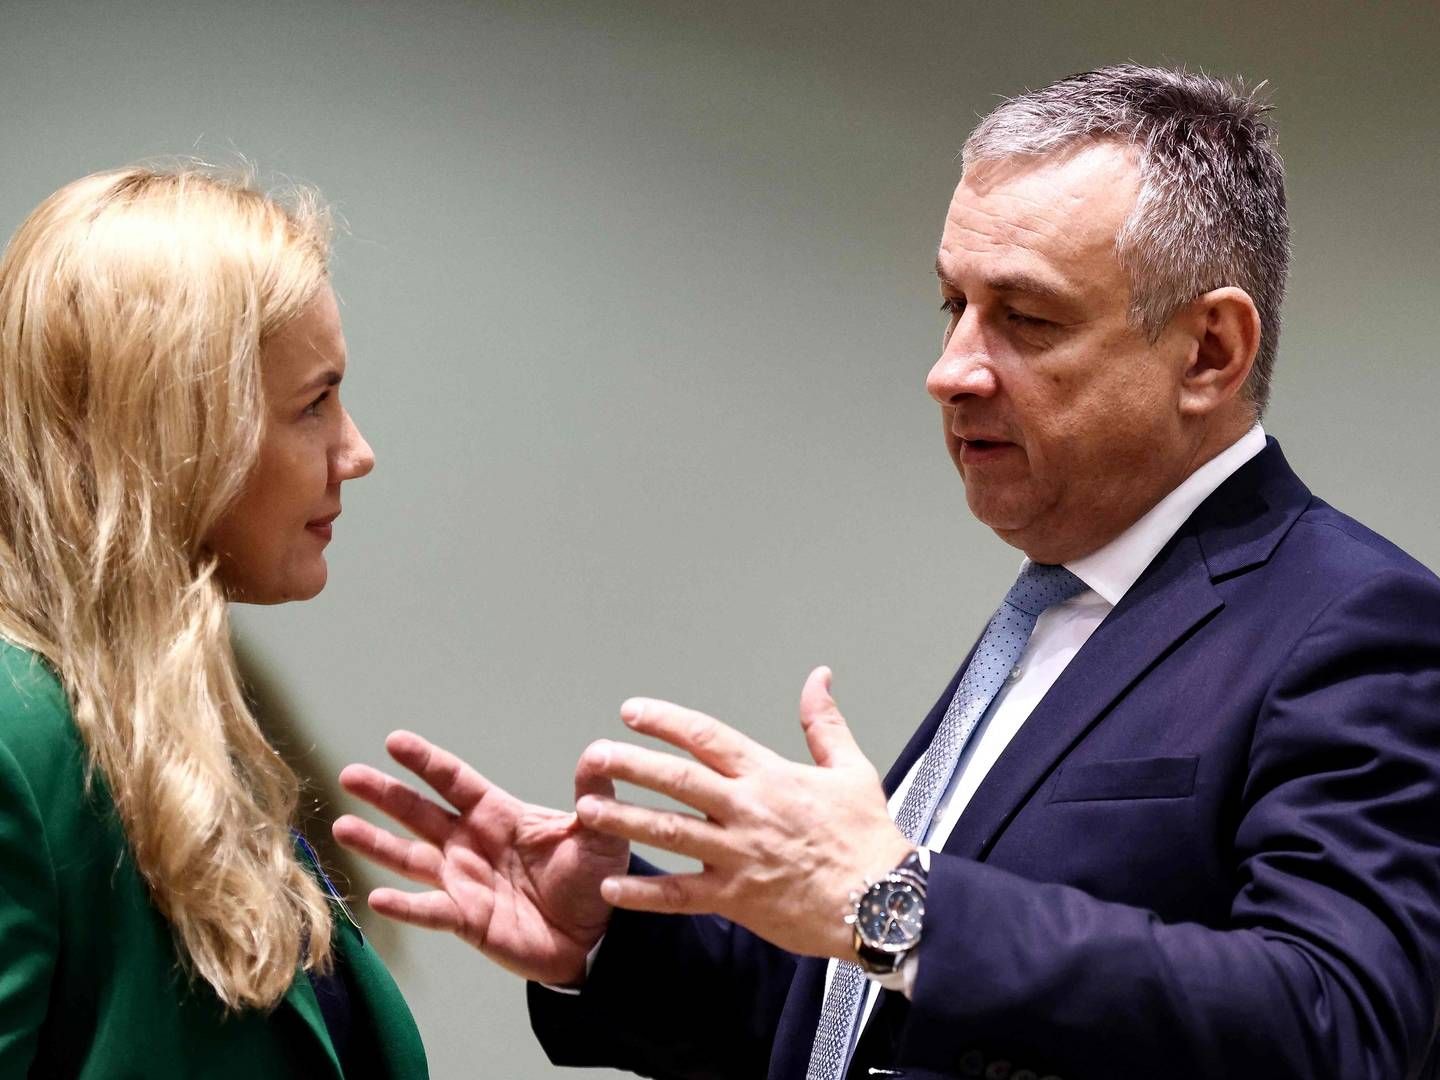 EU Minister of Energy Kadri Simson and Czech Minister of Industry Jozef Sikela have their work cut out for them to solve the energy policy quandary where new measures are taken hostage in the scramble for a cap on gas prices. | Photo: Kenzo Tribouillard/AFP / AFP